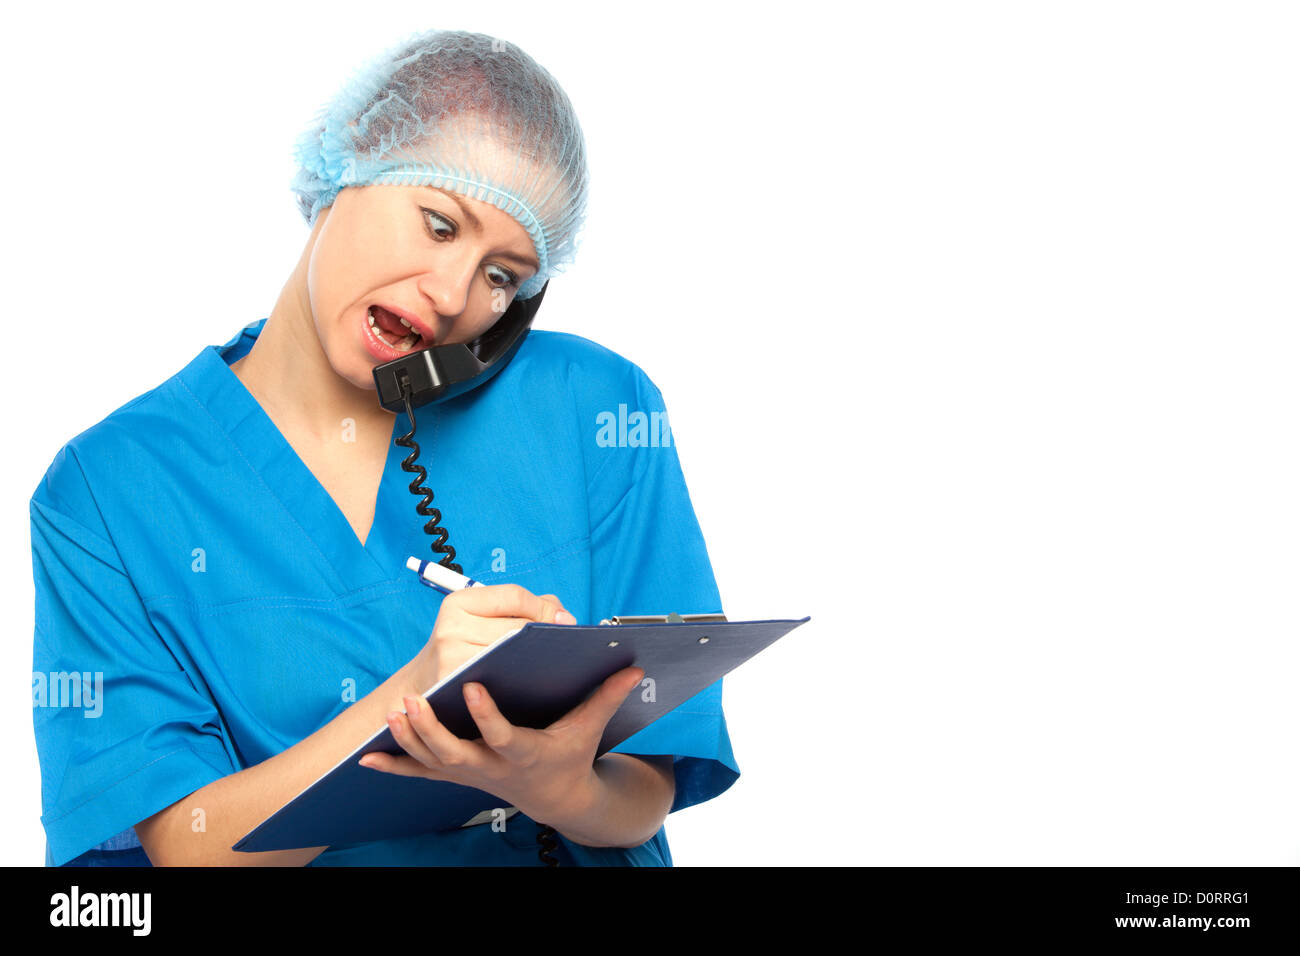 surprised medical doctor yells Stock Photo